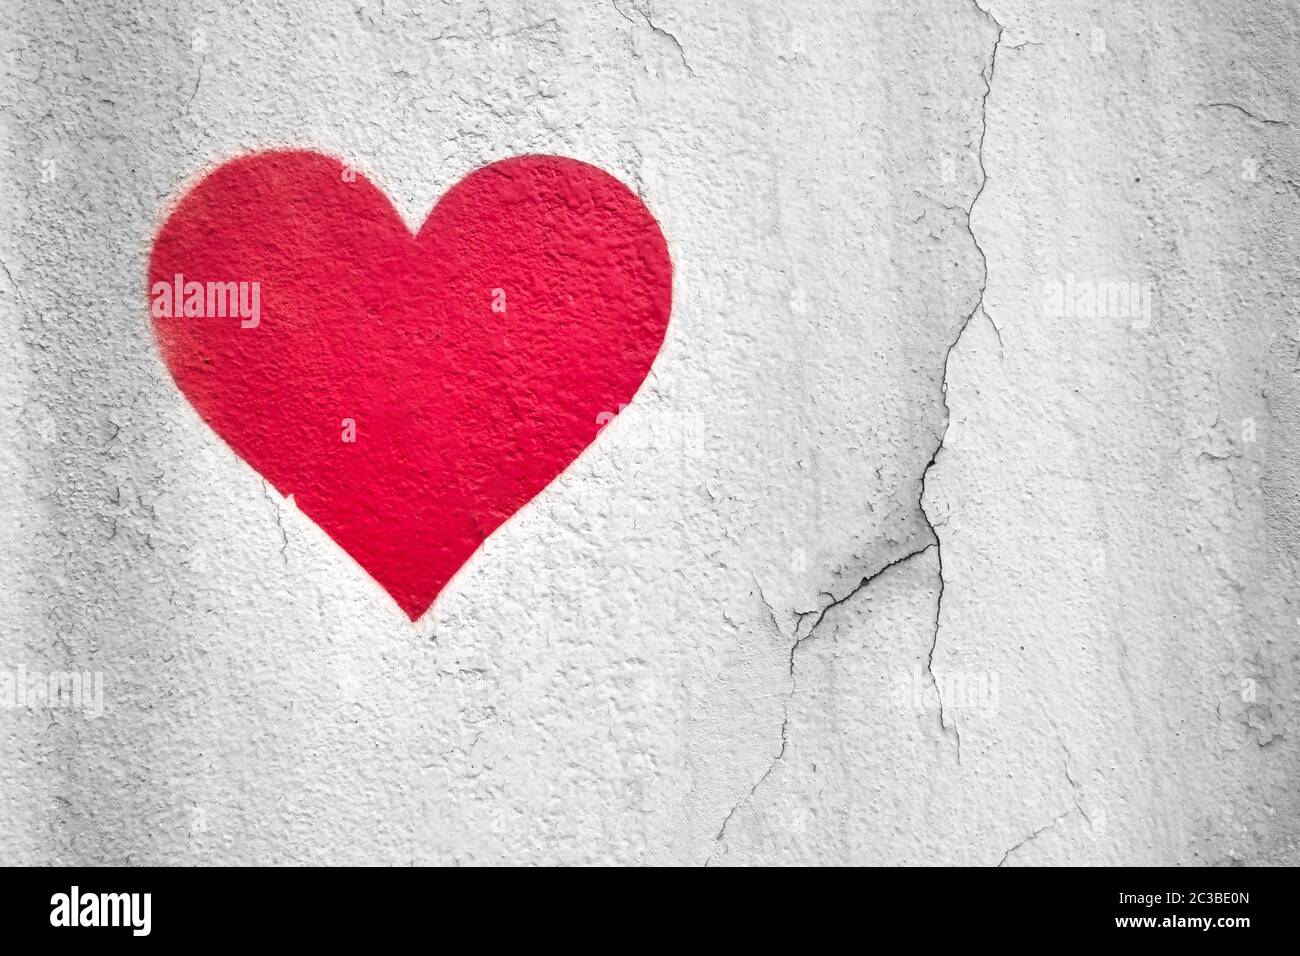 Red love heart hand drawn on grungy wall. Textured background trendy street style. Copy space. Stock Photo